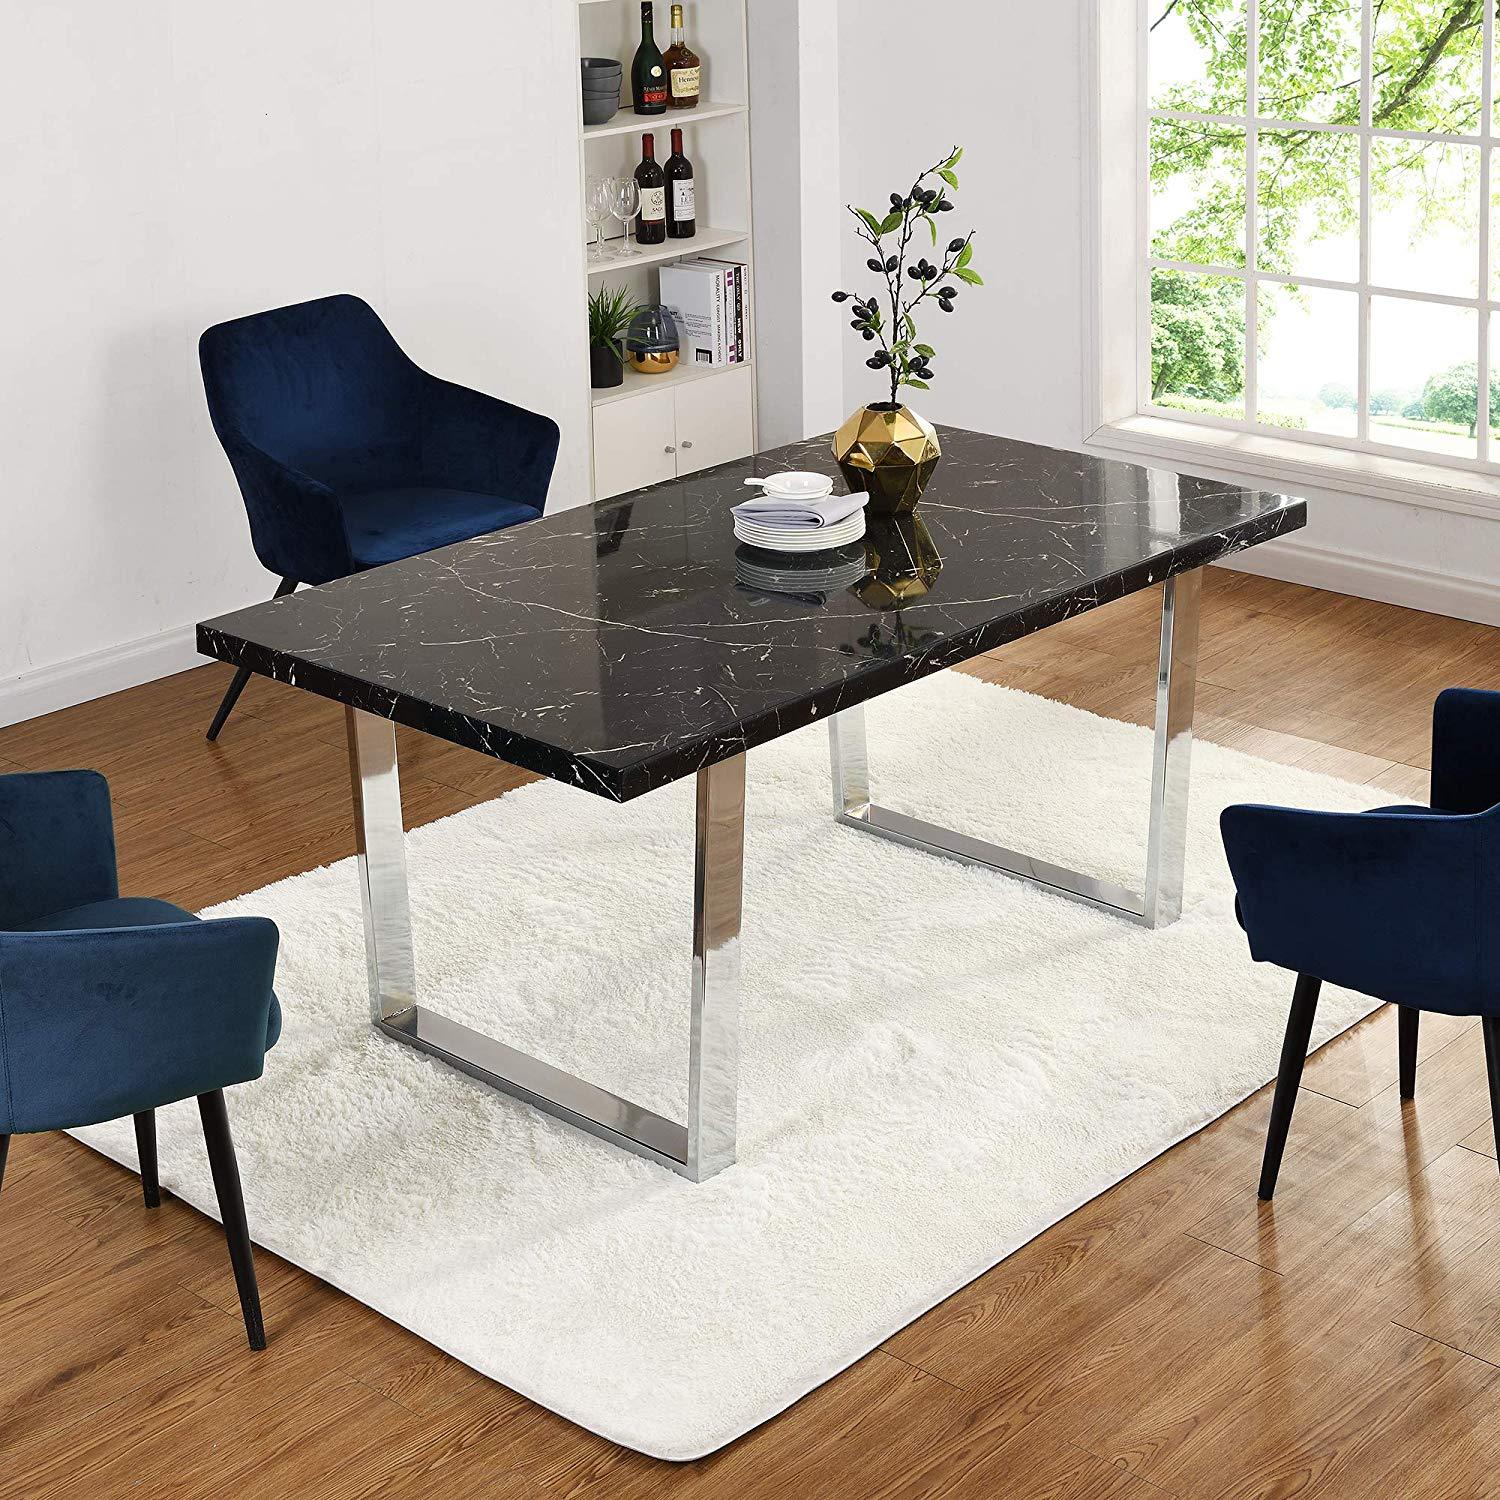 BIASCA 6-Seater High Gloss Marble Effect Dining Table with ... on {keyword}